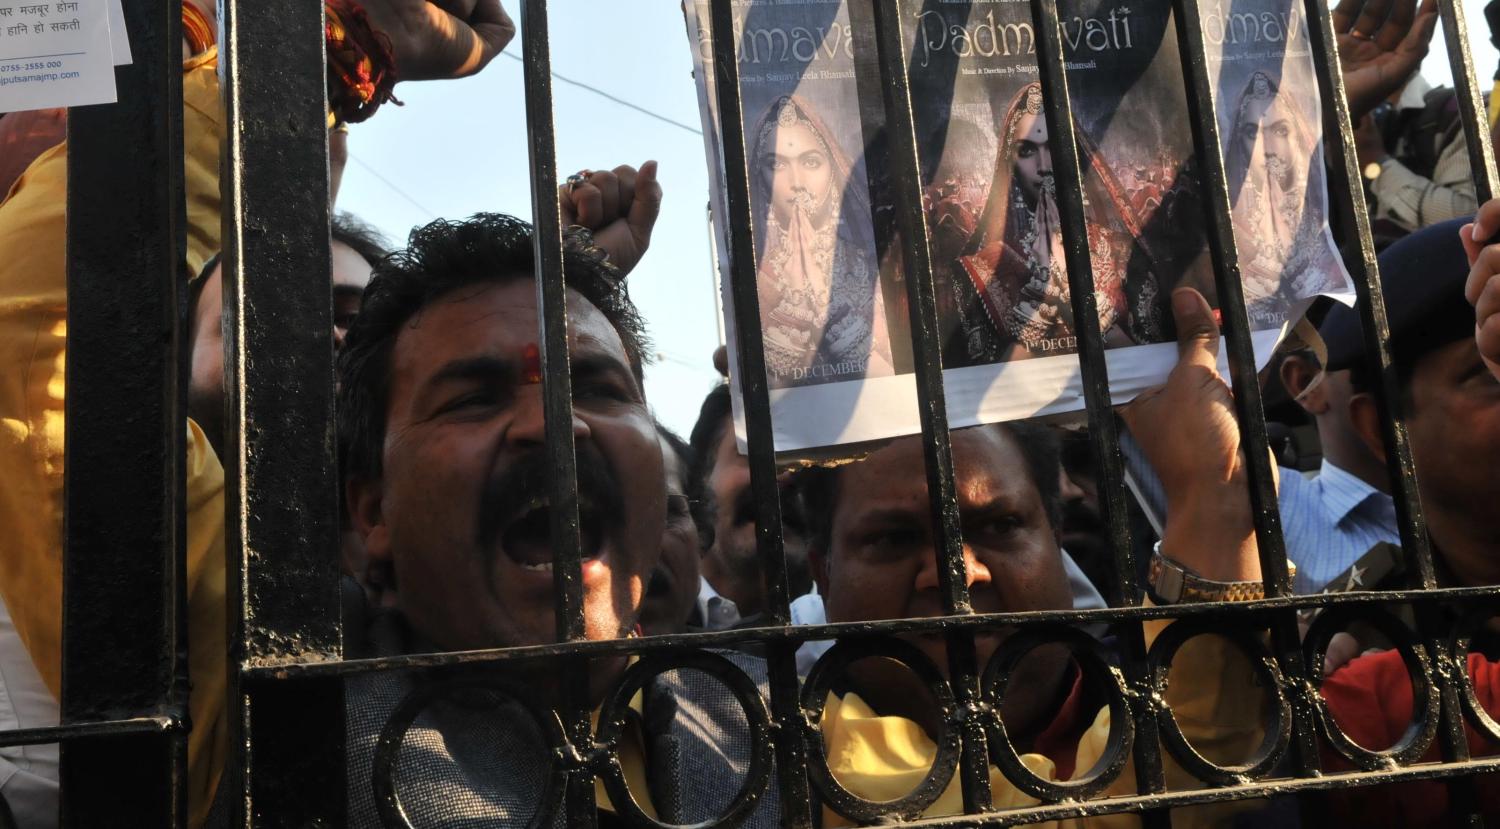 Rajput organisations protest against release of Bollywood film Padmaavat in January (Photo: Mujeeb Faruqui/Getty) 